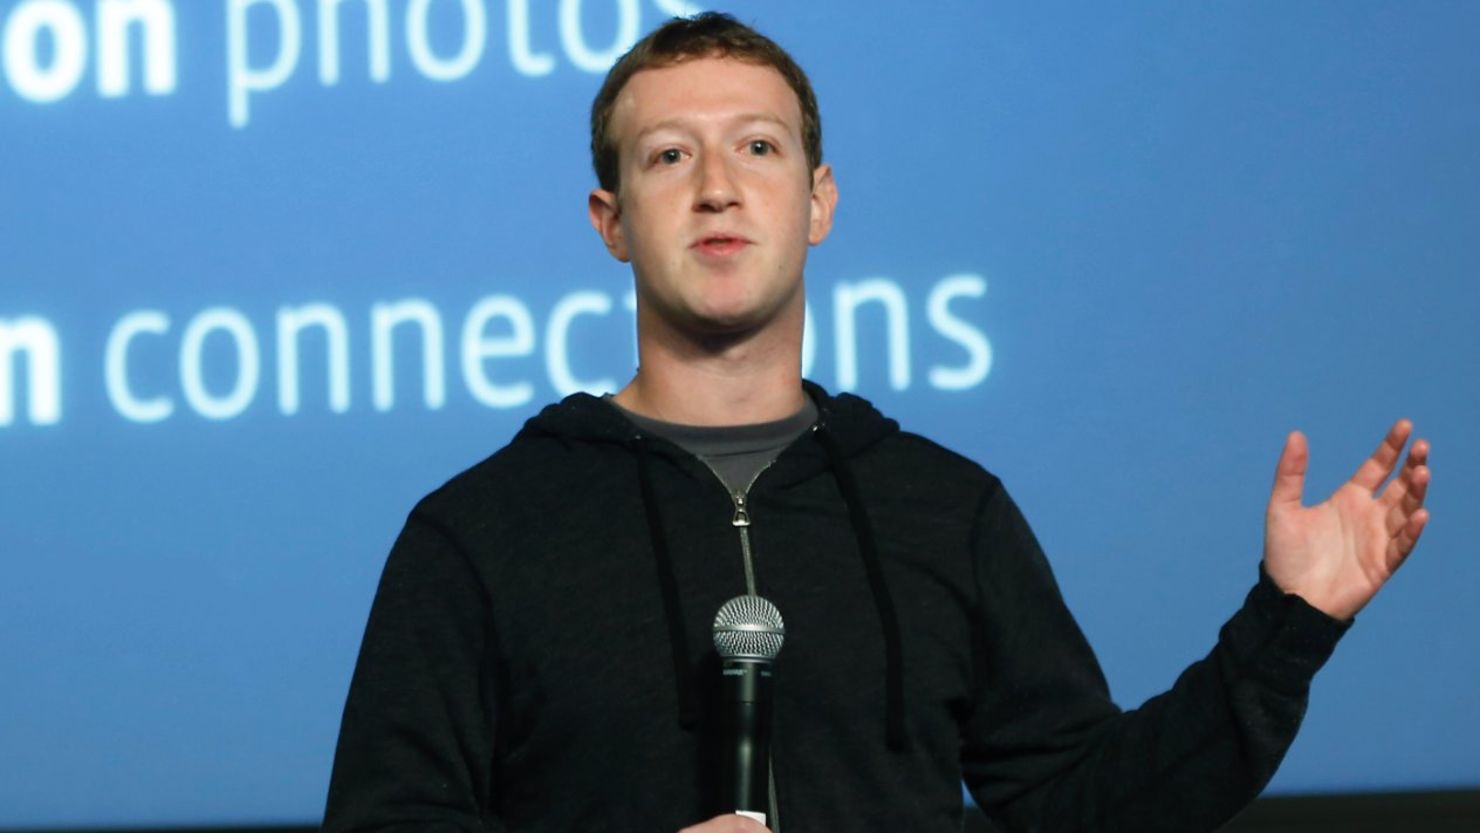 Facebook CEO Mark Zuckerberg introduces the company's new "Graph Search" tool at a press event in California.